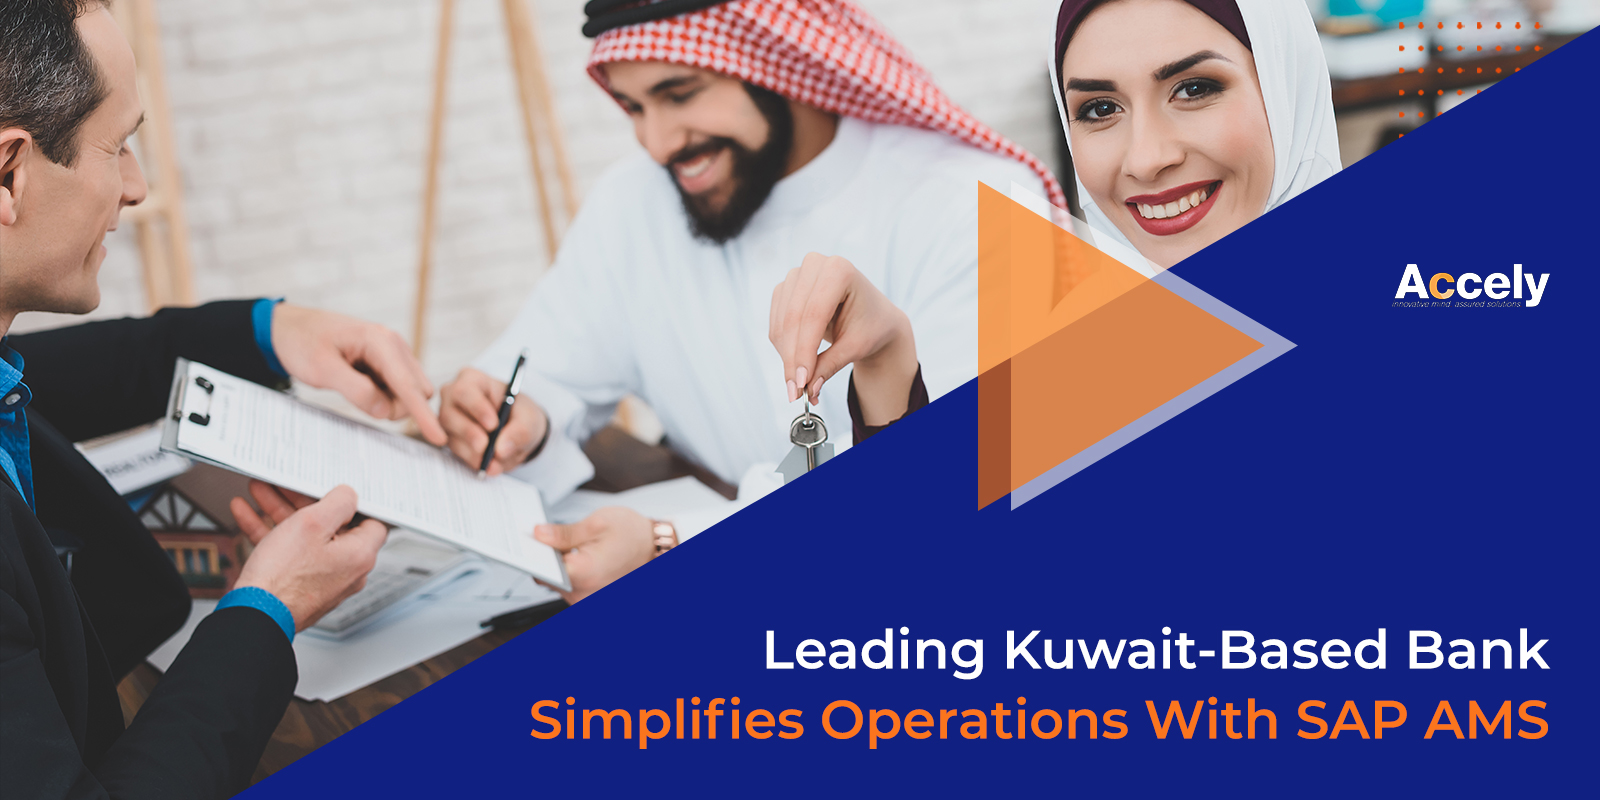 Leading Kuwait-Based Bank Simplifies Operations With SAP AMS